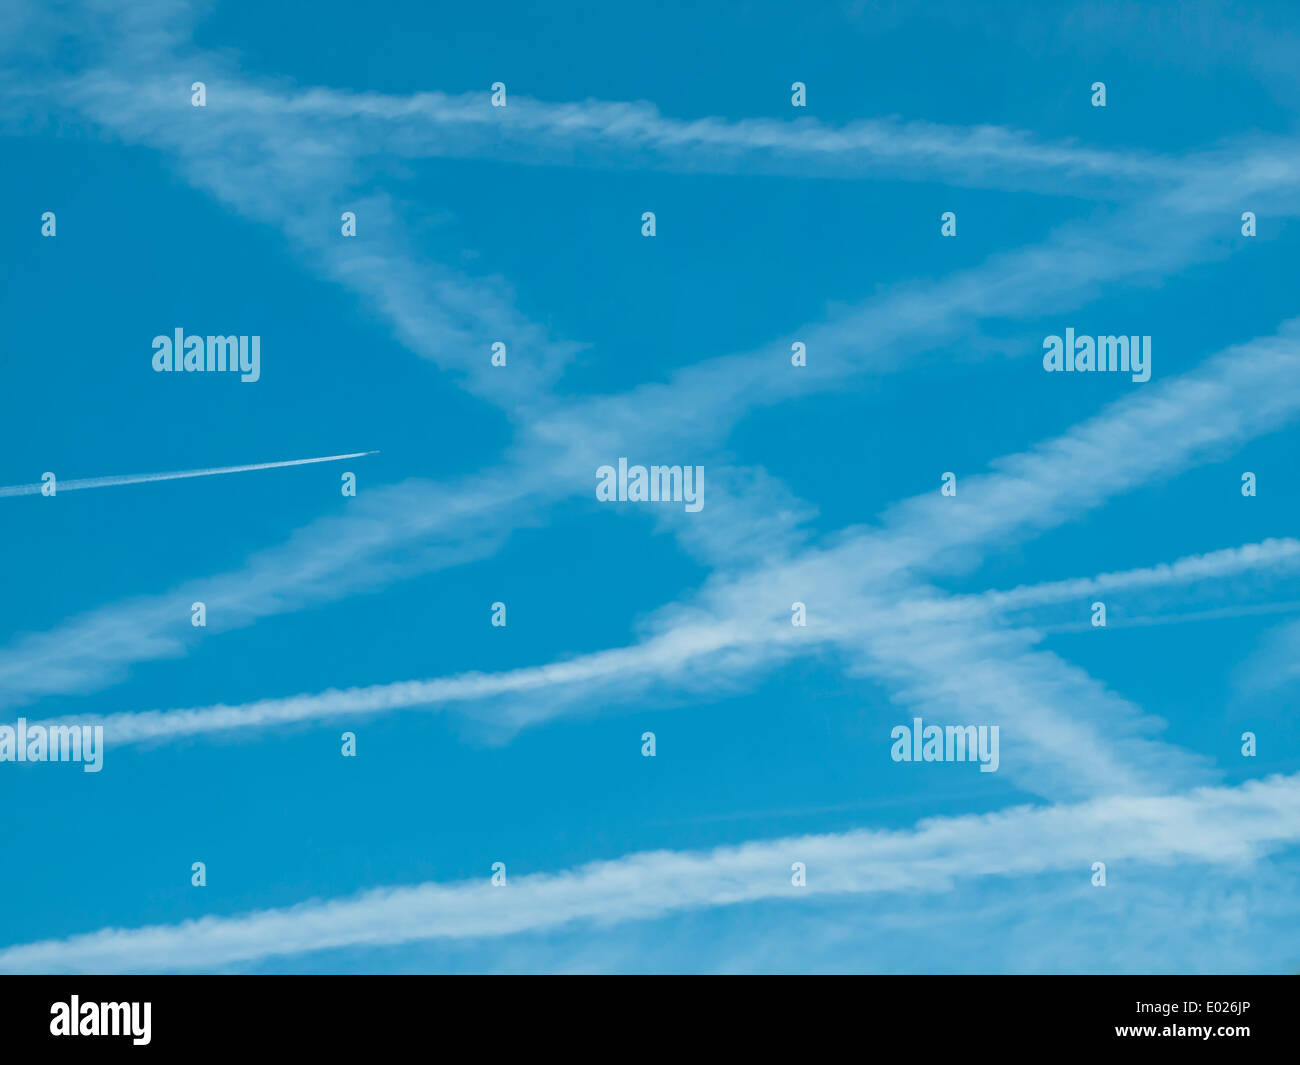 Pattern of many contrails/vapor trails of jet airplanes in the blue sky. Stock Photo